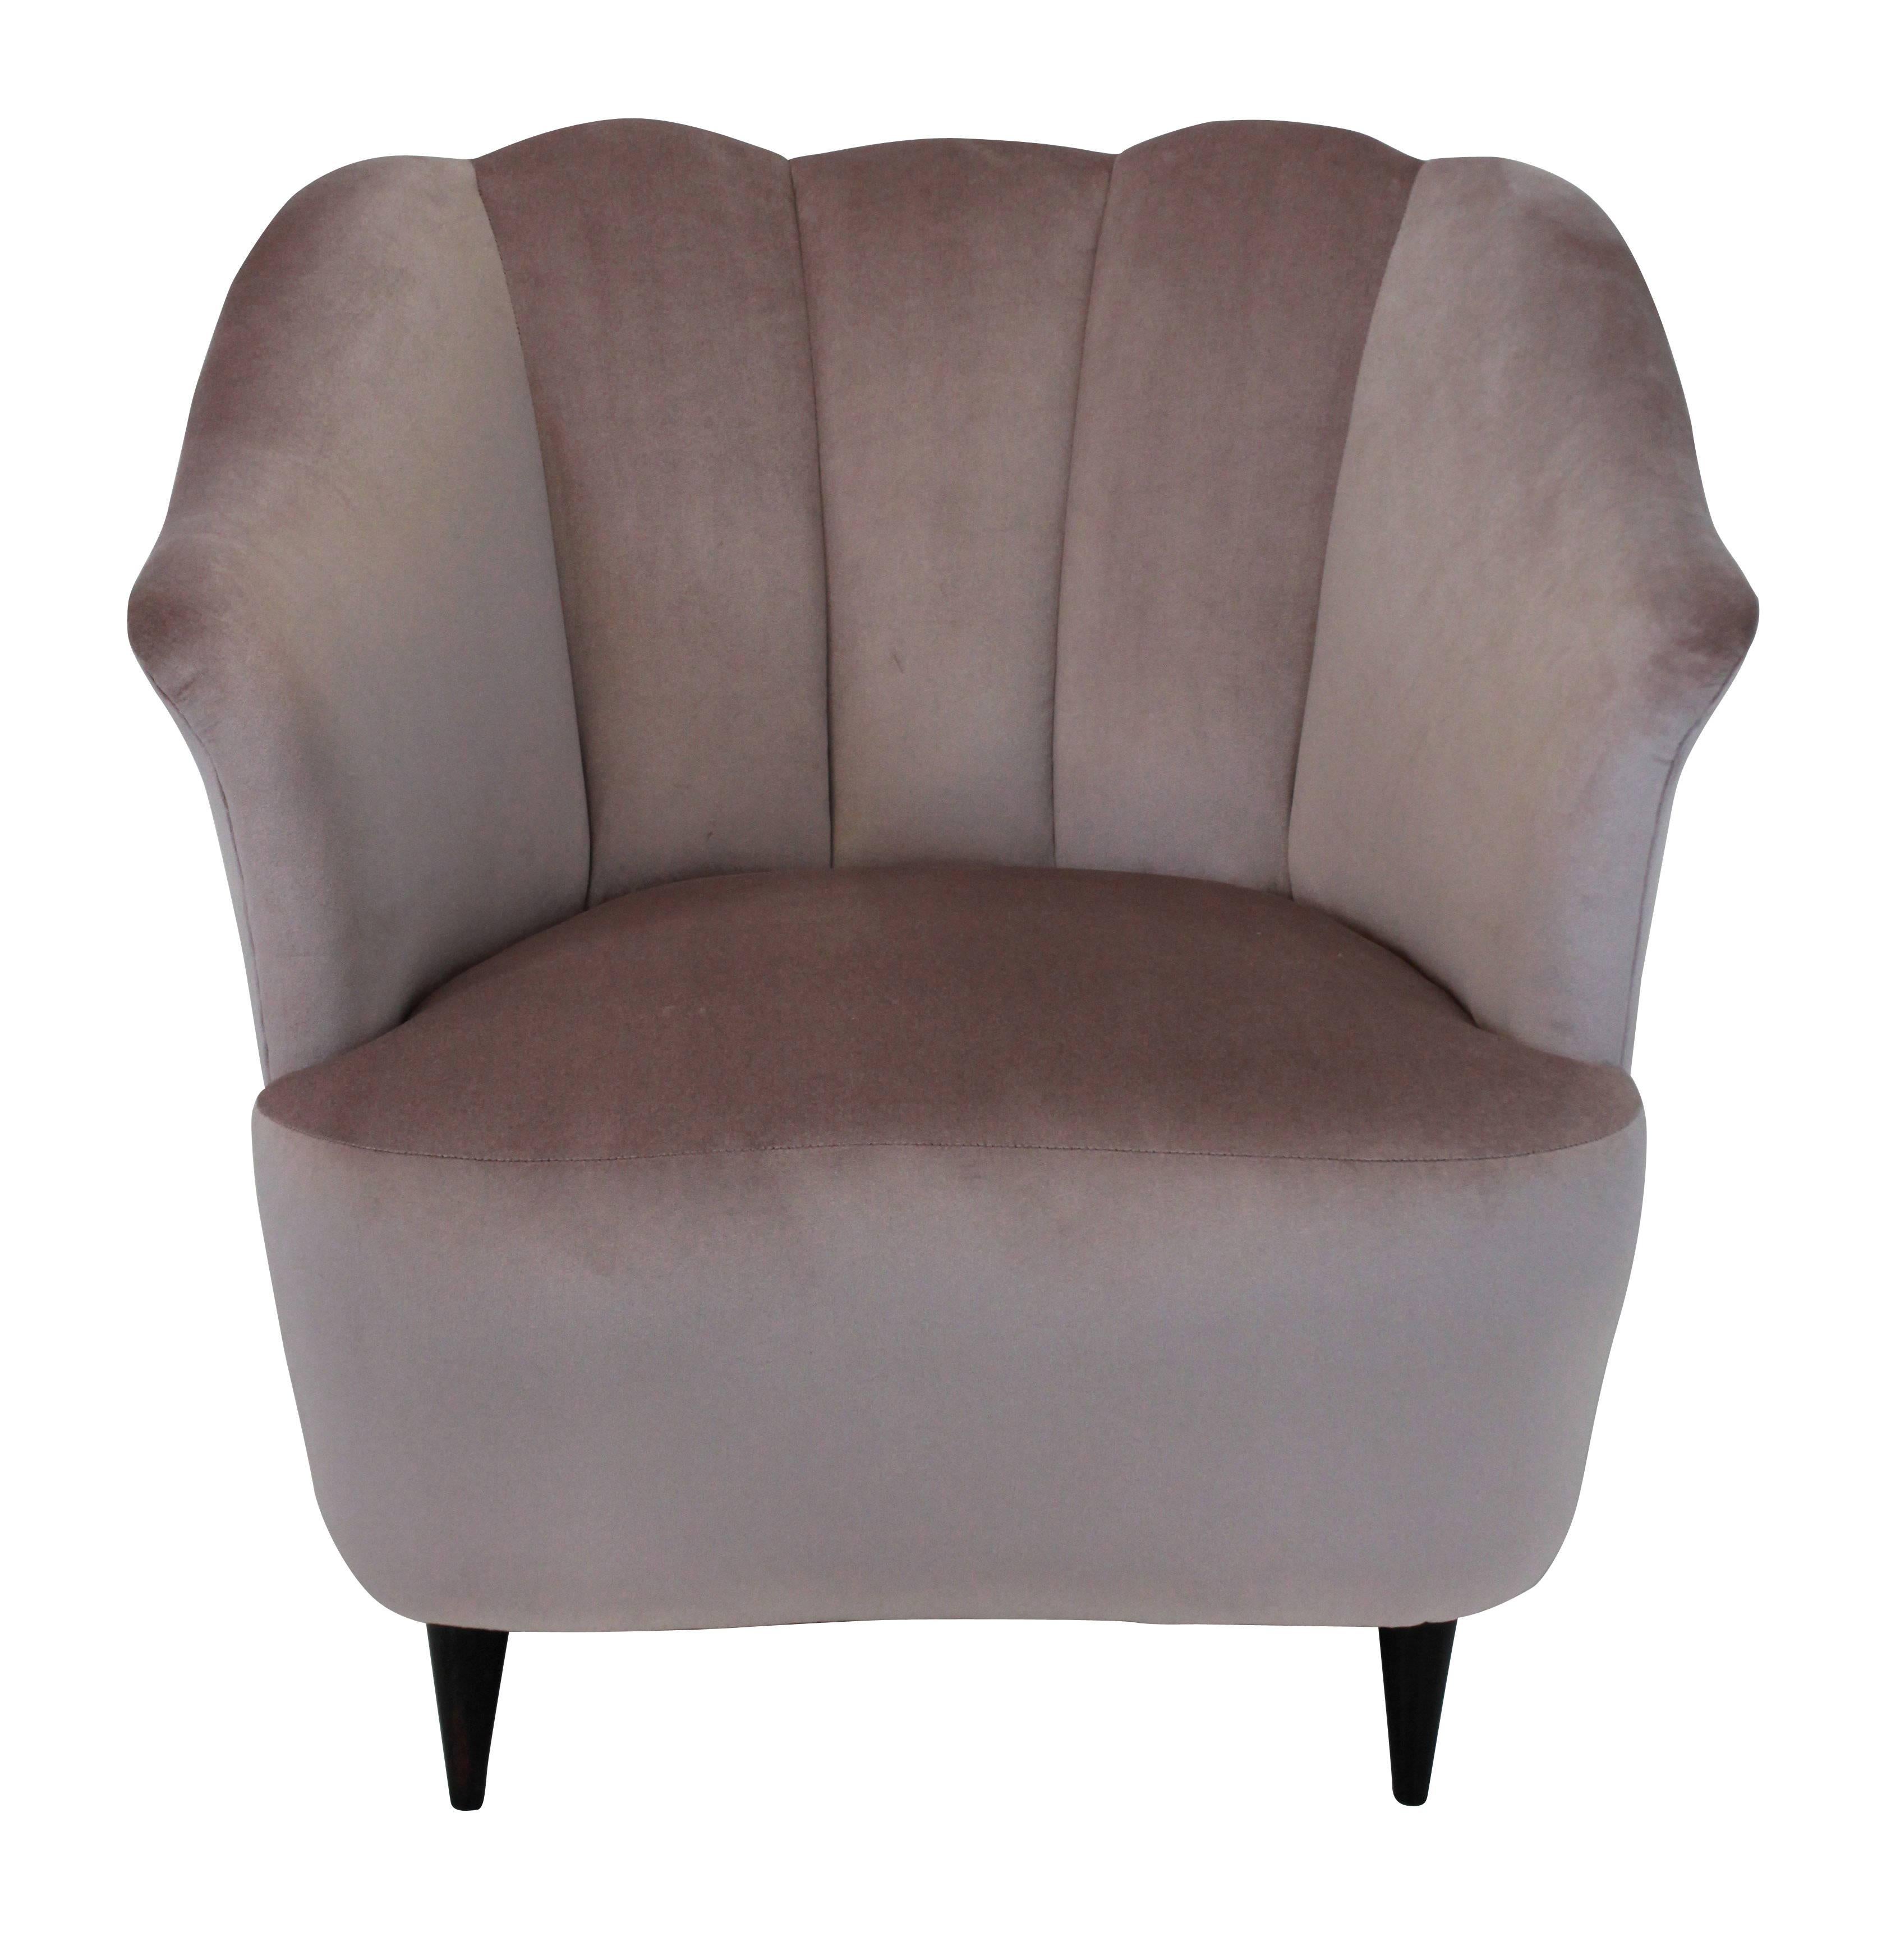 A pair of Italian scallop backed armchairs, newly upholstered in pale pink velvet.